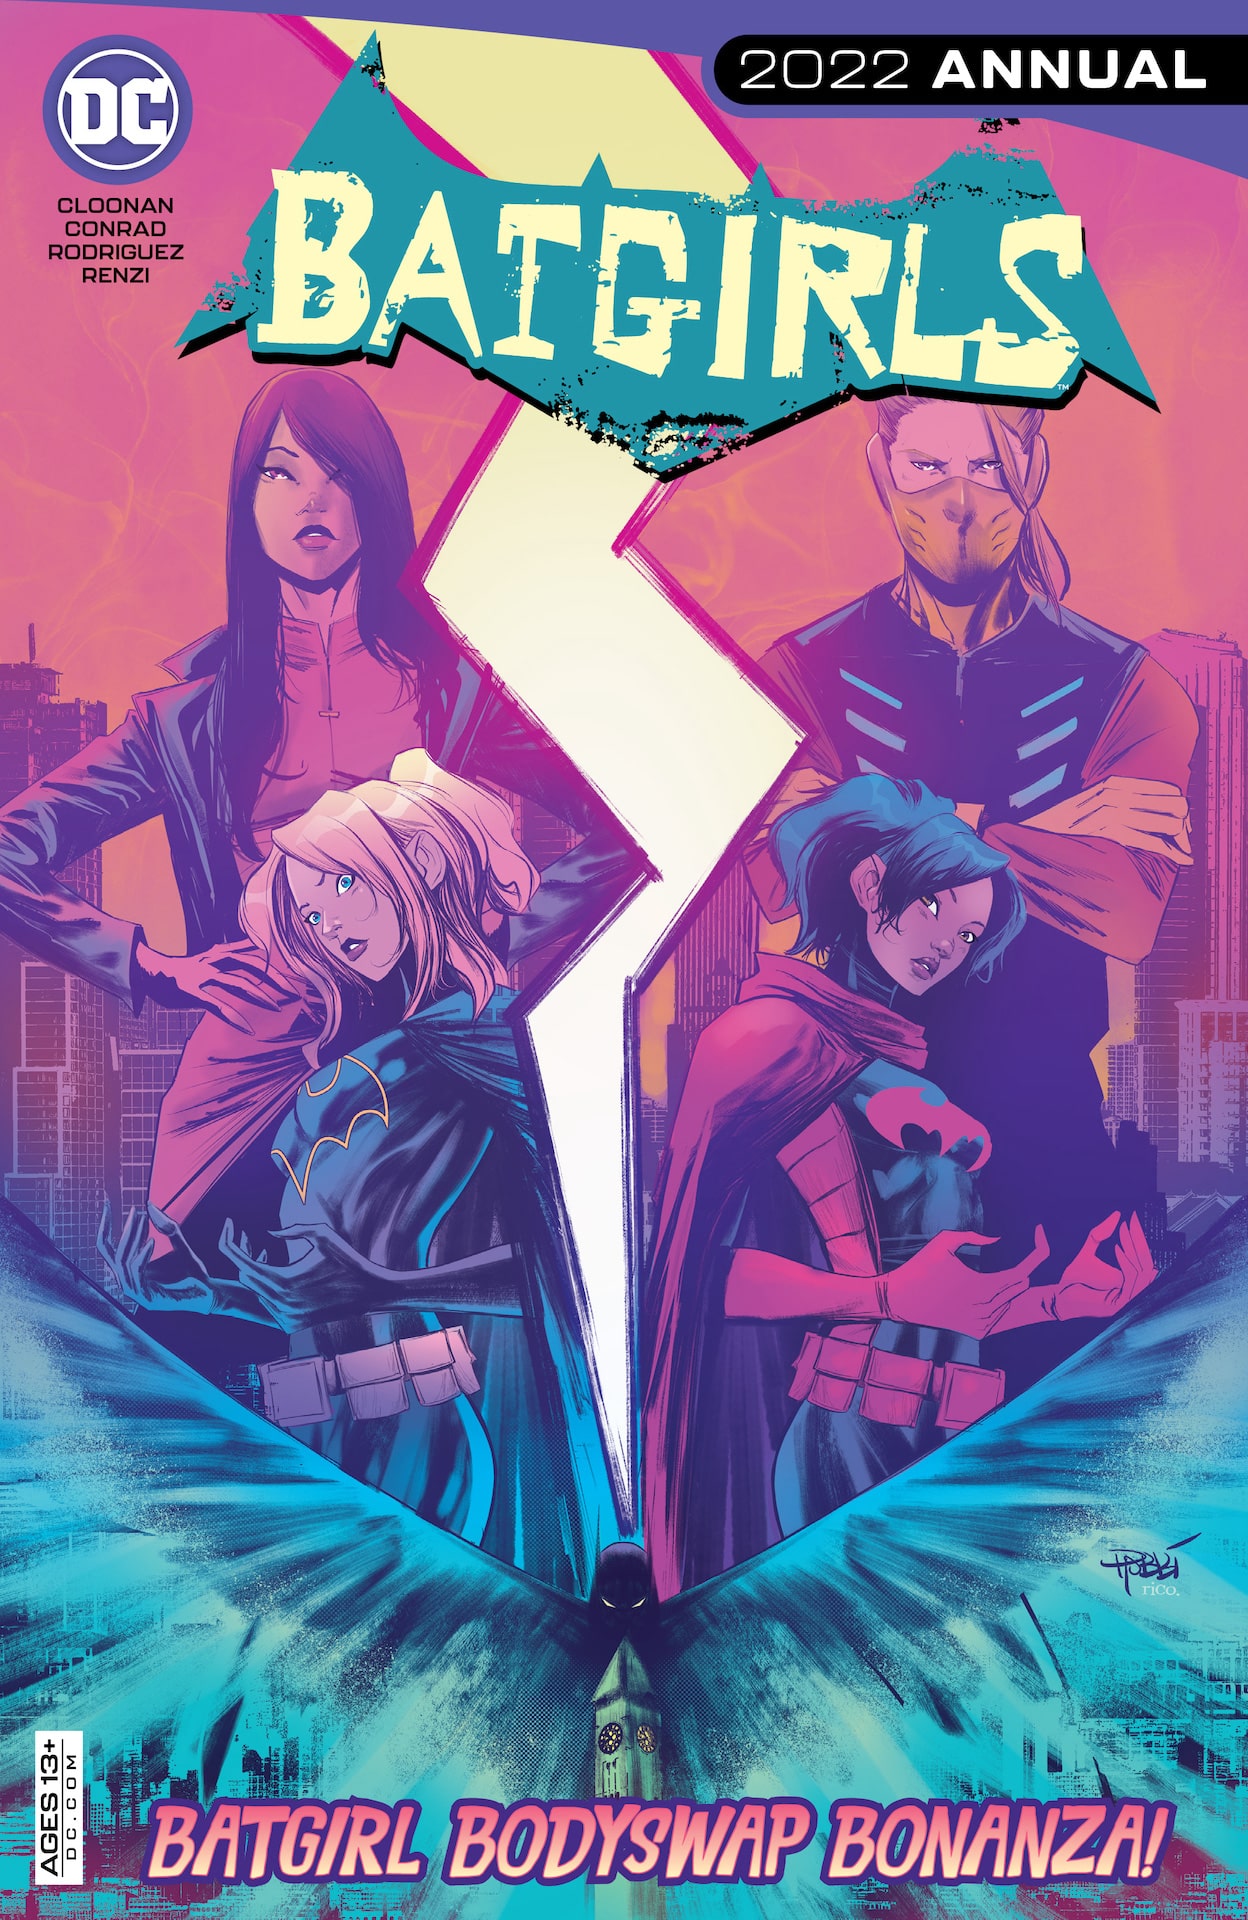 DC Preview: Batgirls 2022 Annual